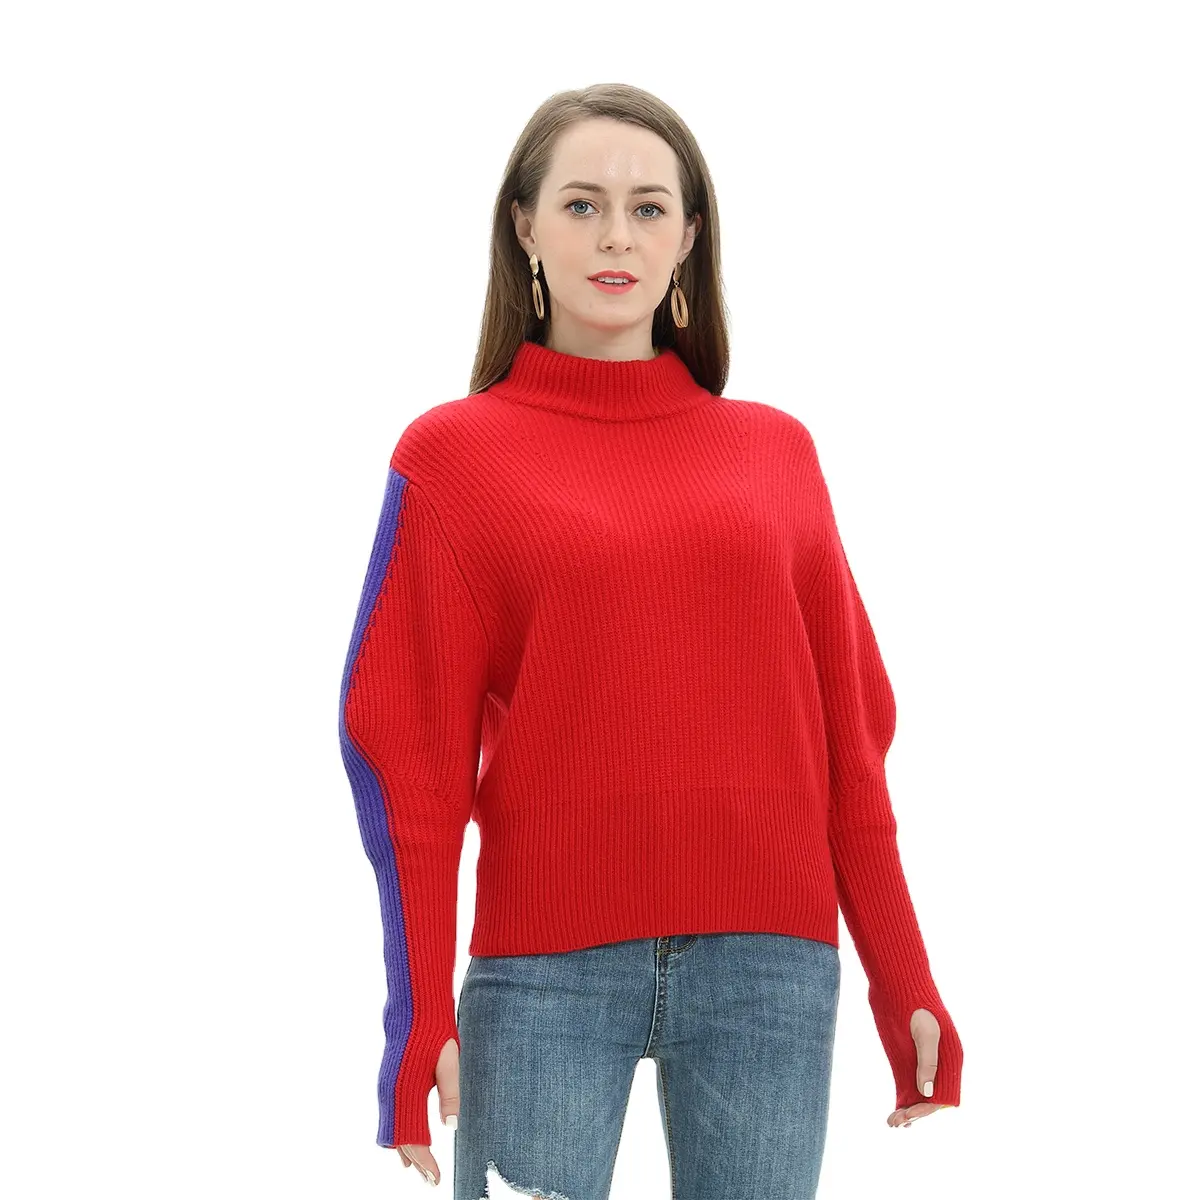 Custom Sweaters Women Clothes New hot selling Longsleeve Winter Stylish Casual acrylic pullover Women sweater